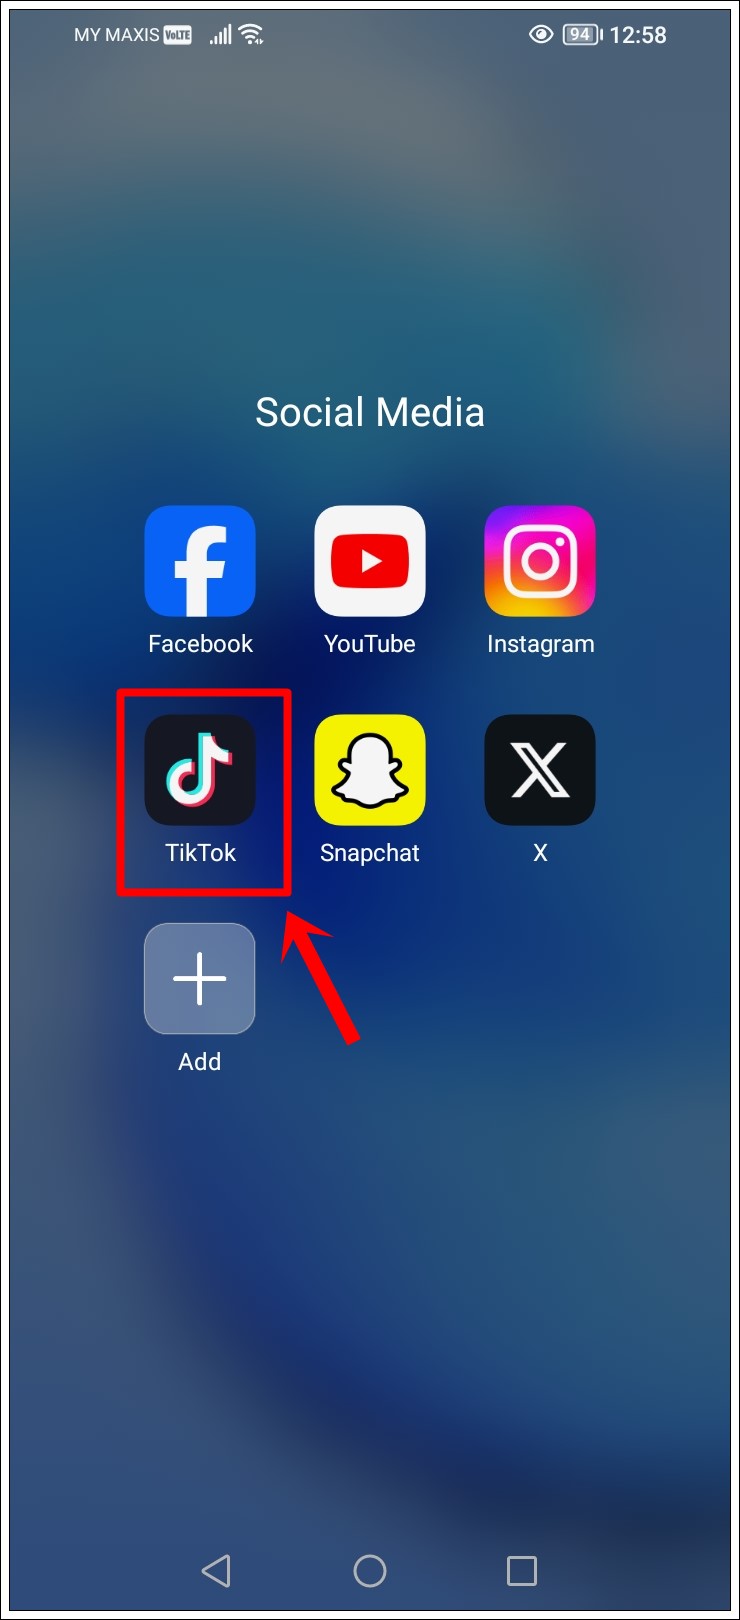 This is a mobile screenshot with the TikTok app icon highlighted.